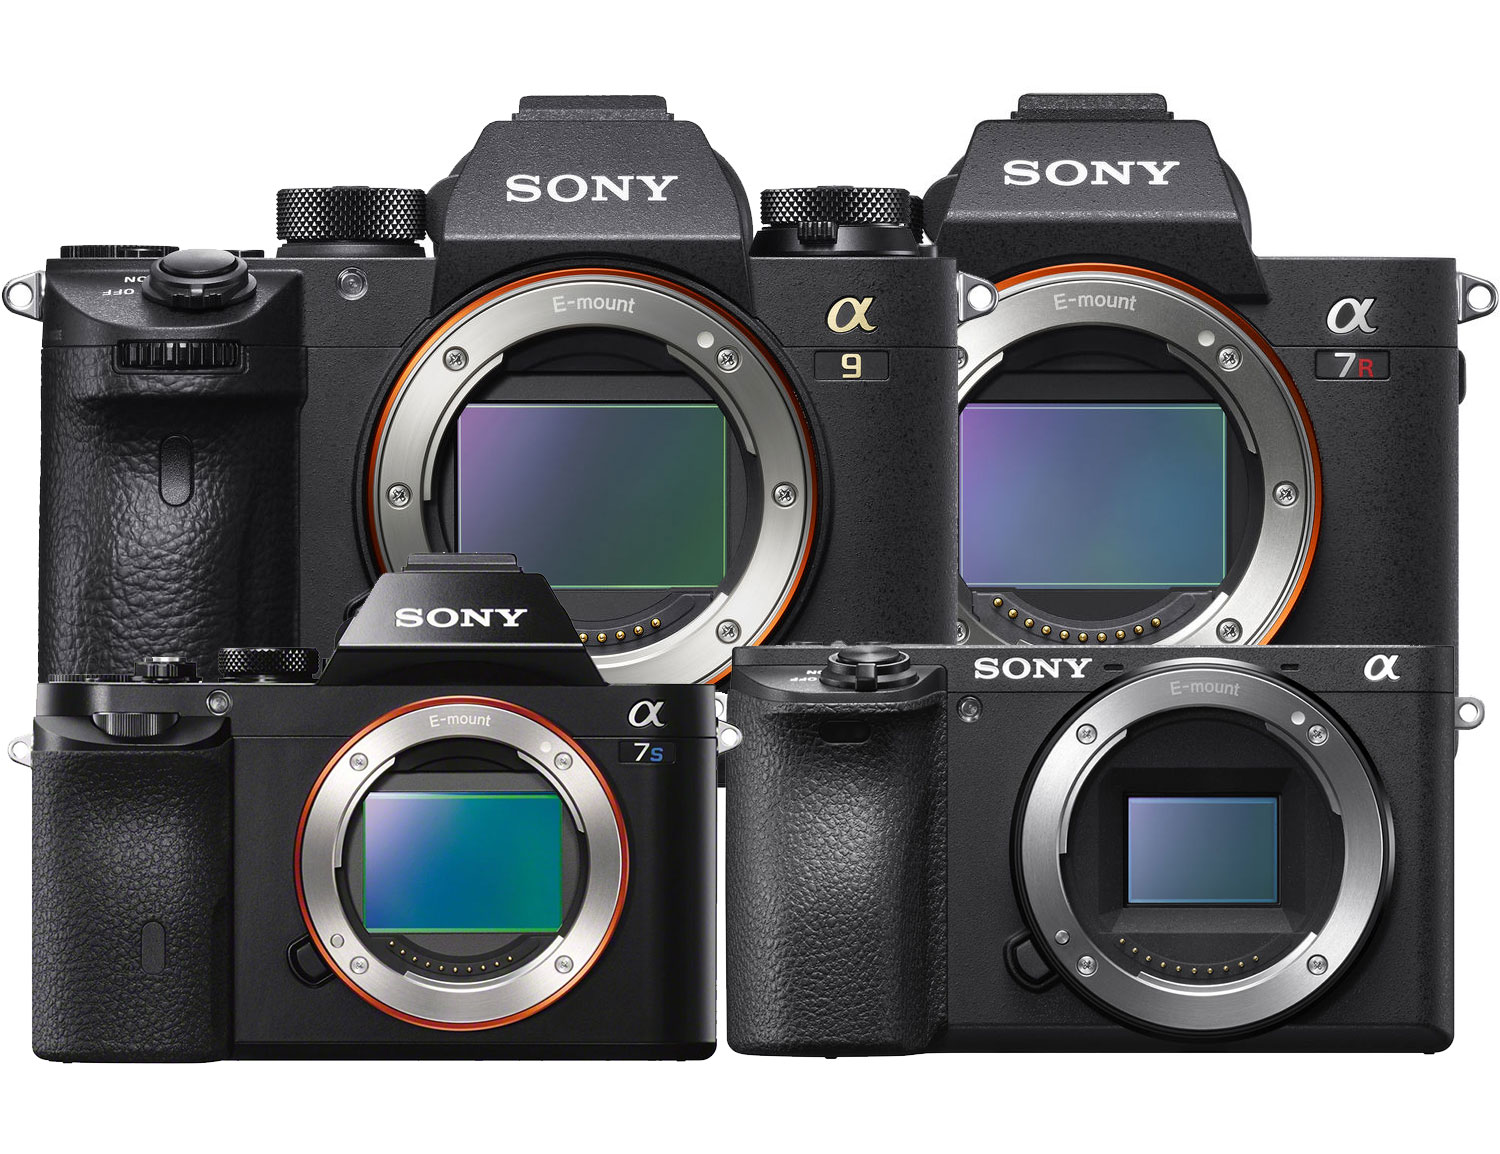 The Sony A6700 Review & Walkthrough: Latest APS-C Camera… - Moment